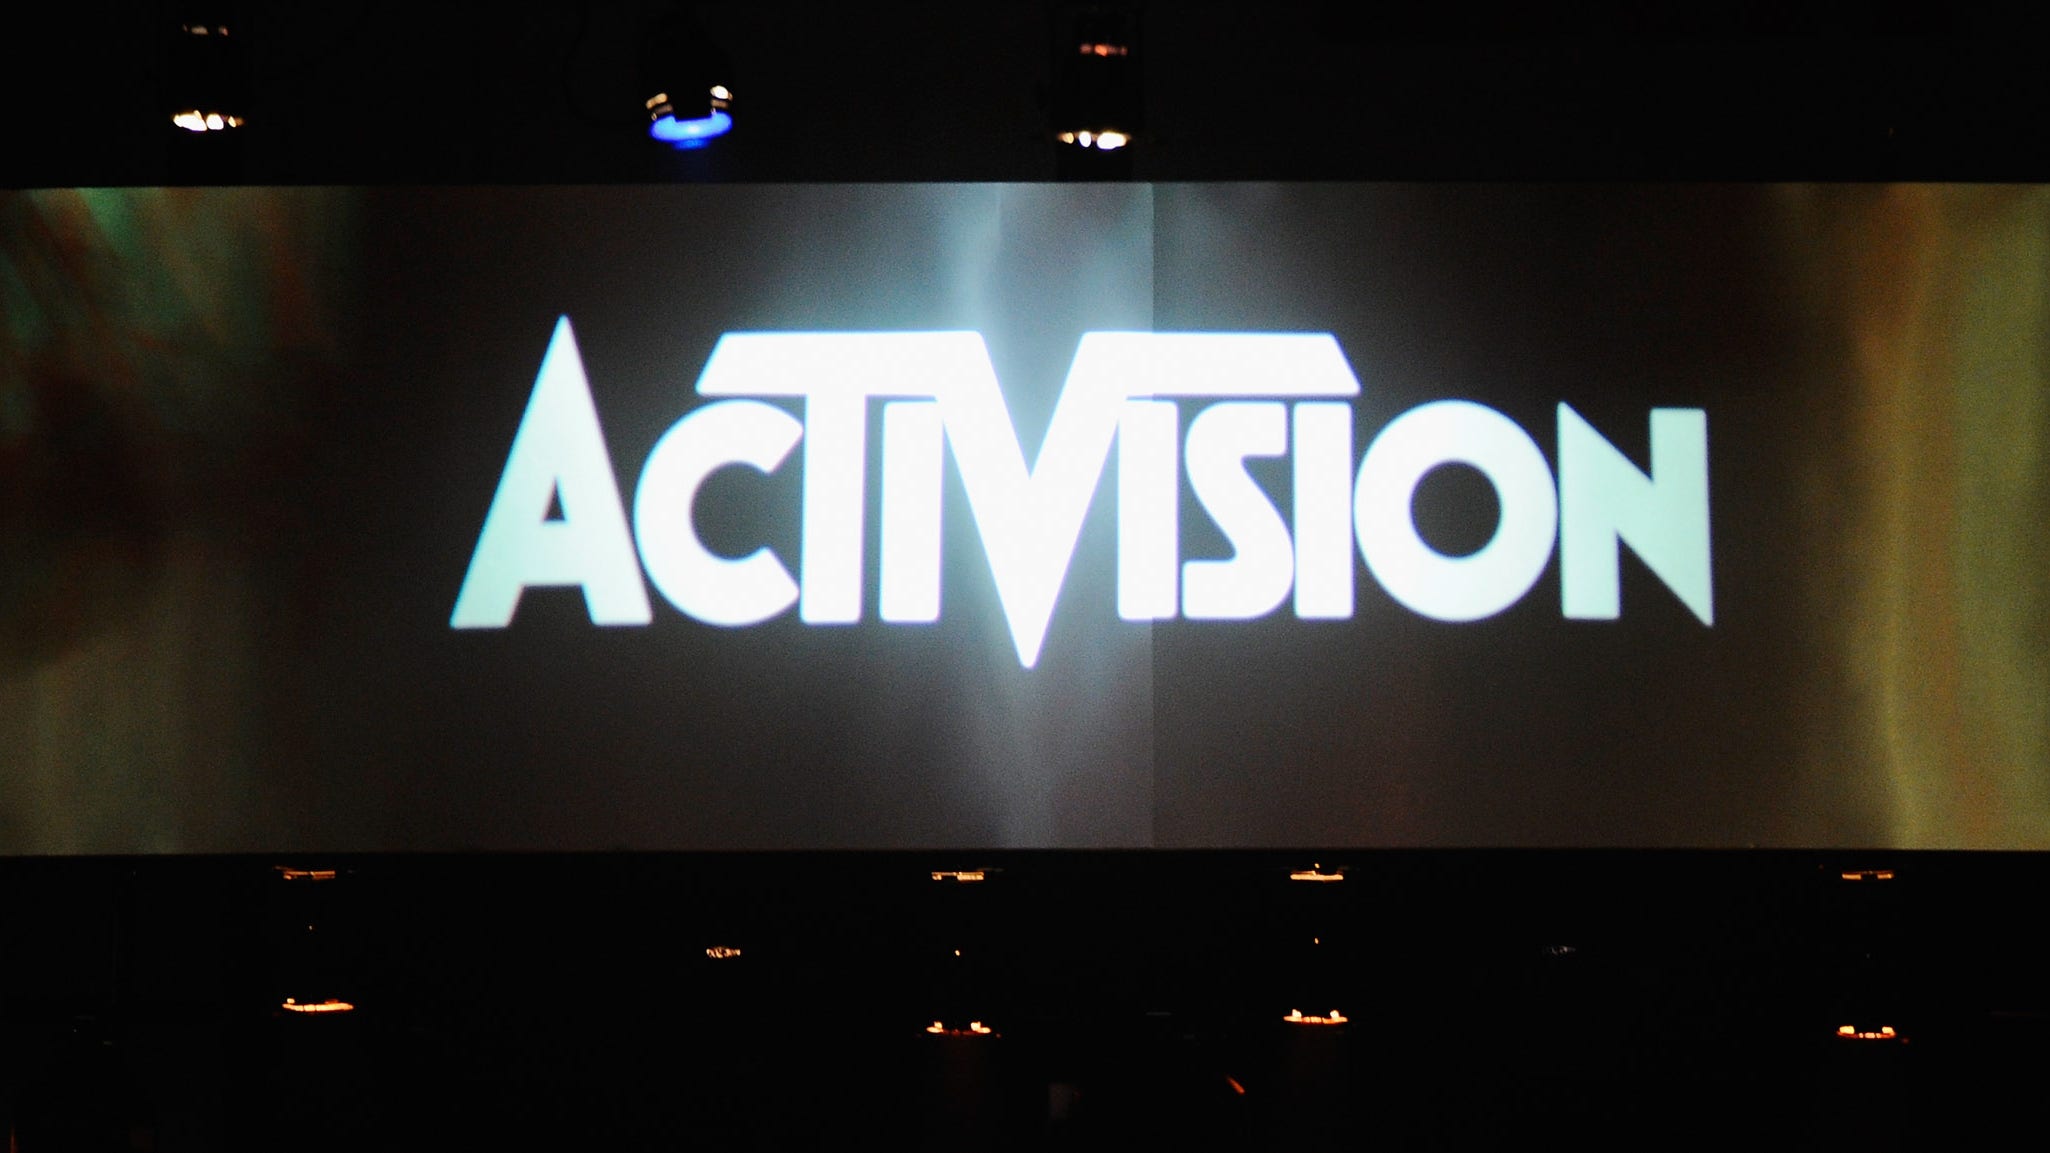 CMA Approves Microsoft's $69B Takeover of Activision Blizzard